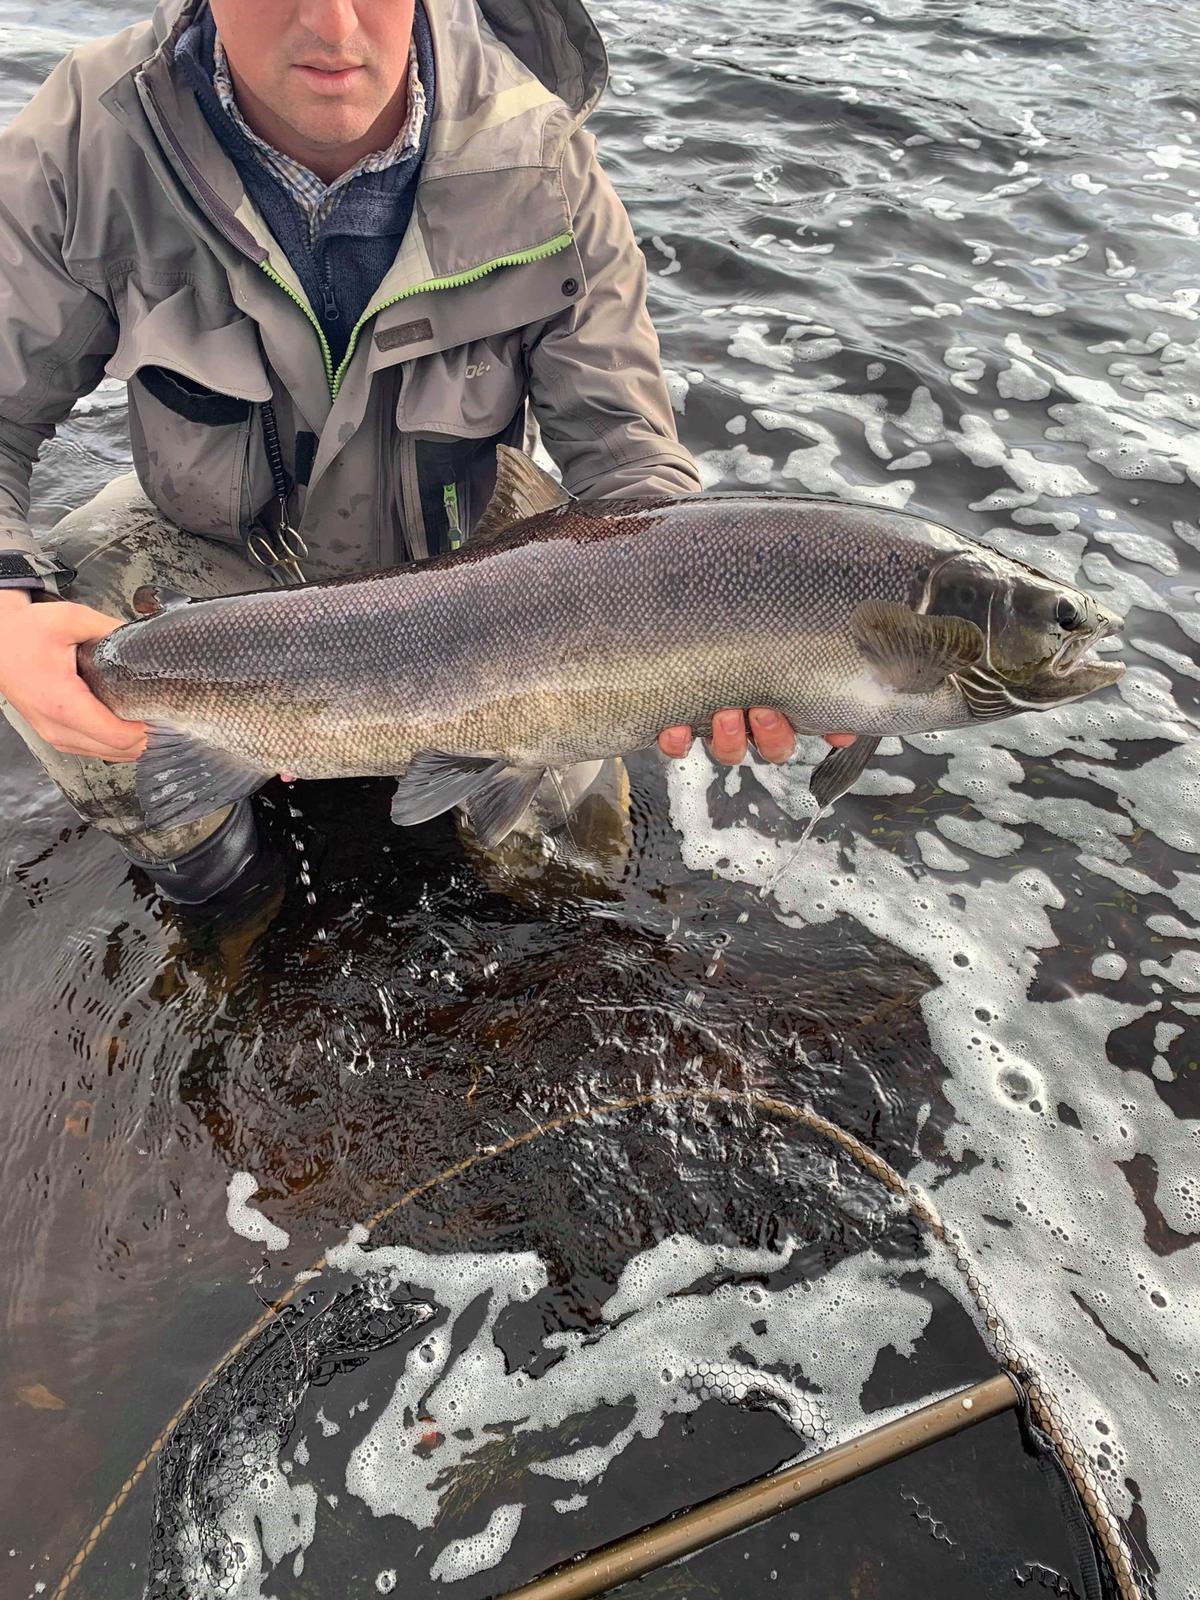 Fishing Report - September 2019, Salmon Fishing News from the